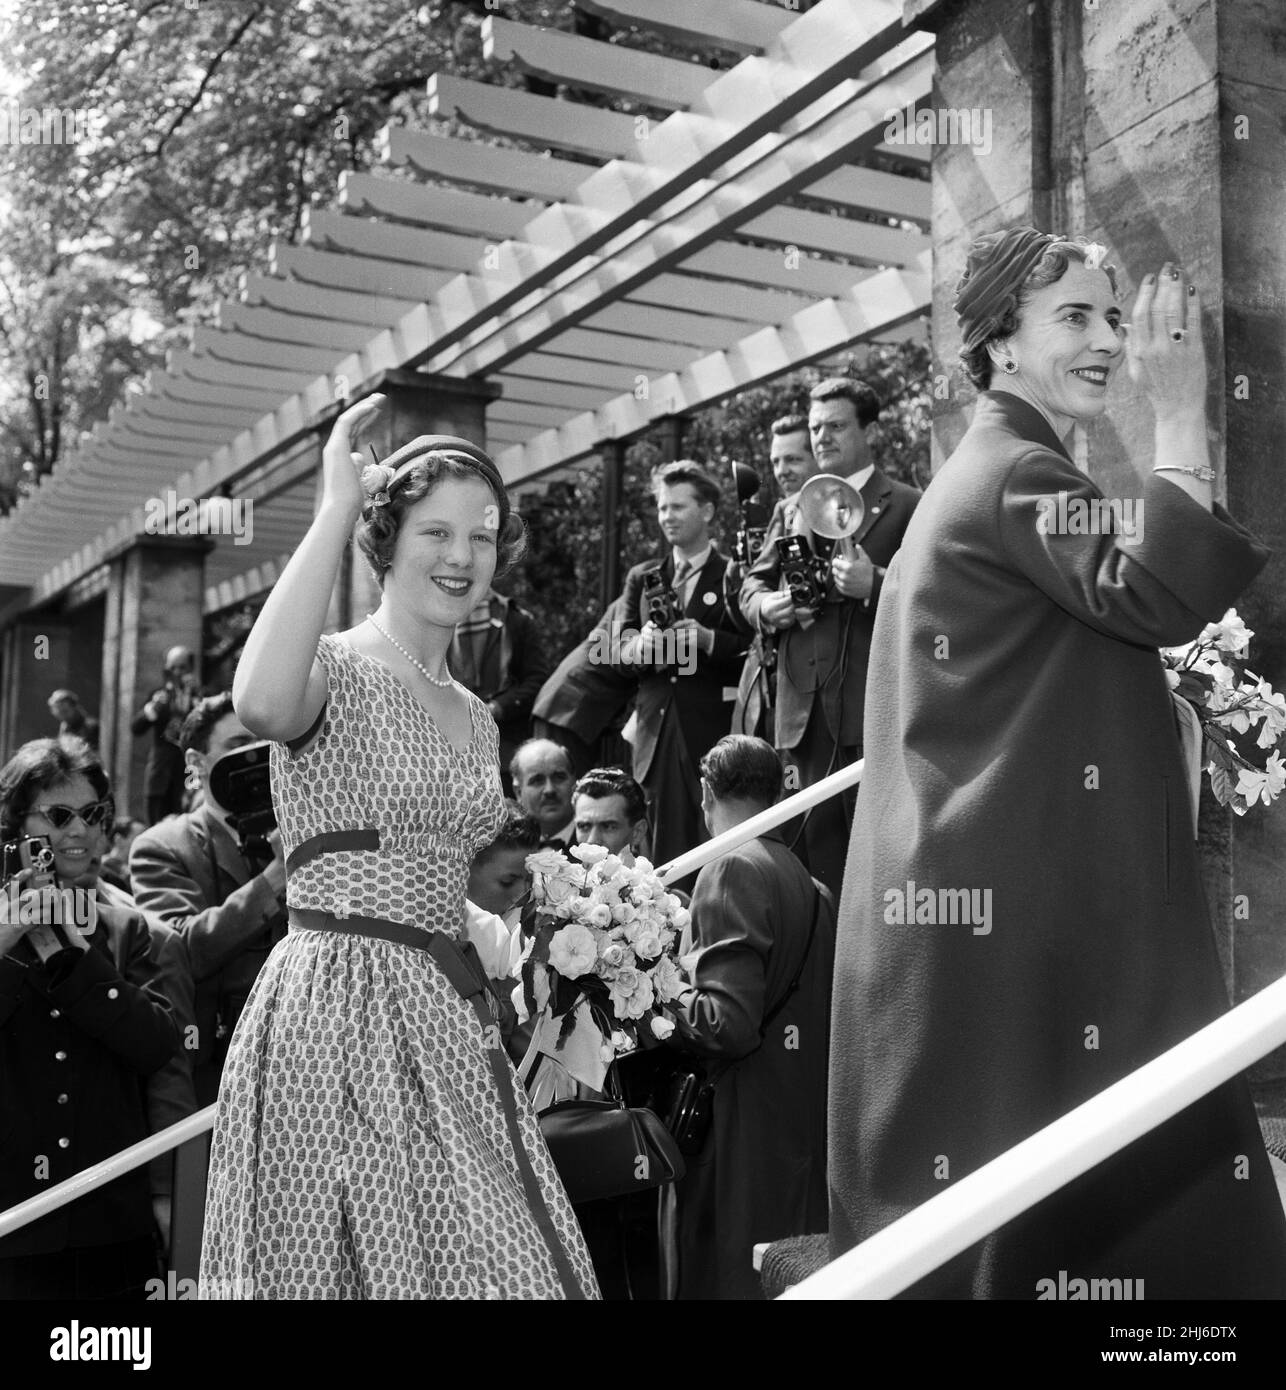 Queen Ingrid (right) and Princess Margrethe photographed during their tour of the Carlsberg Breweries. The Danish royal family are hosting the Queen Elizabeth II and Prince Philip, Duke of Edinburgh visit to Denmark 22nd May 1957. Stock Photo